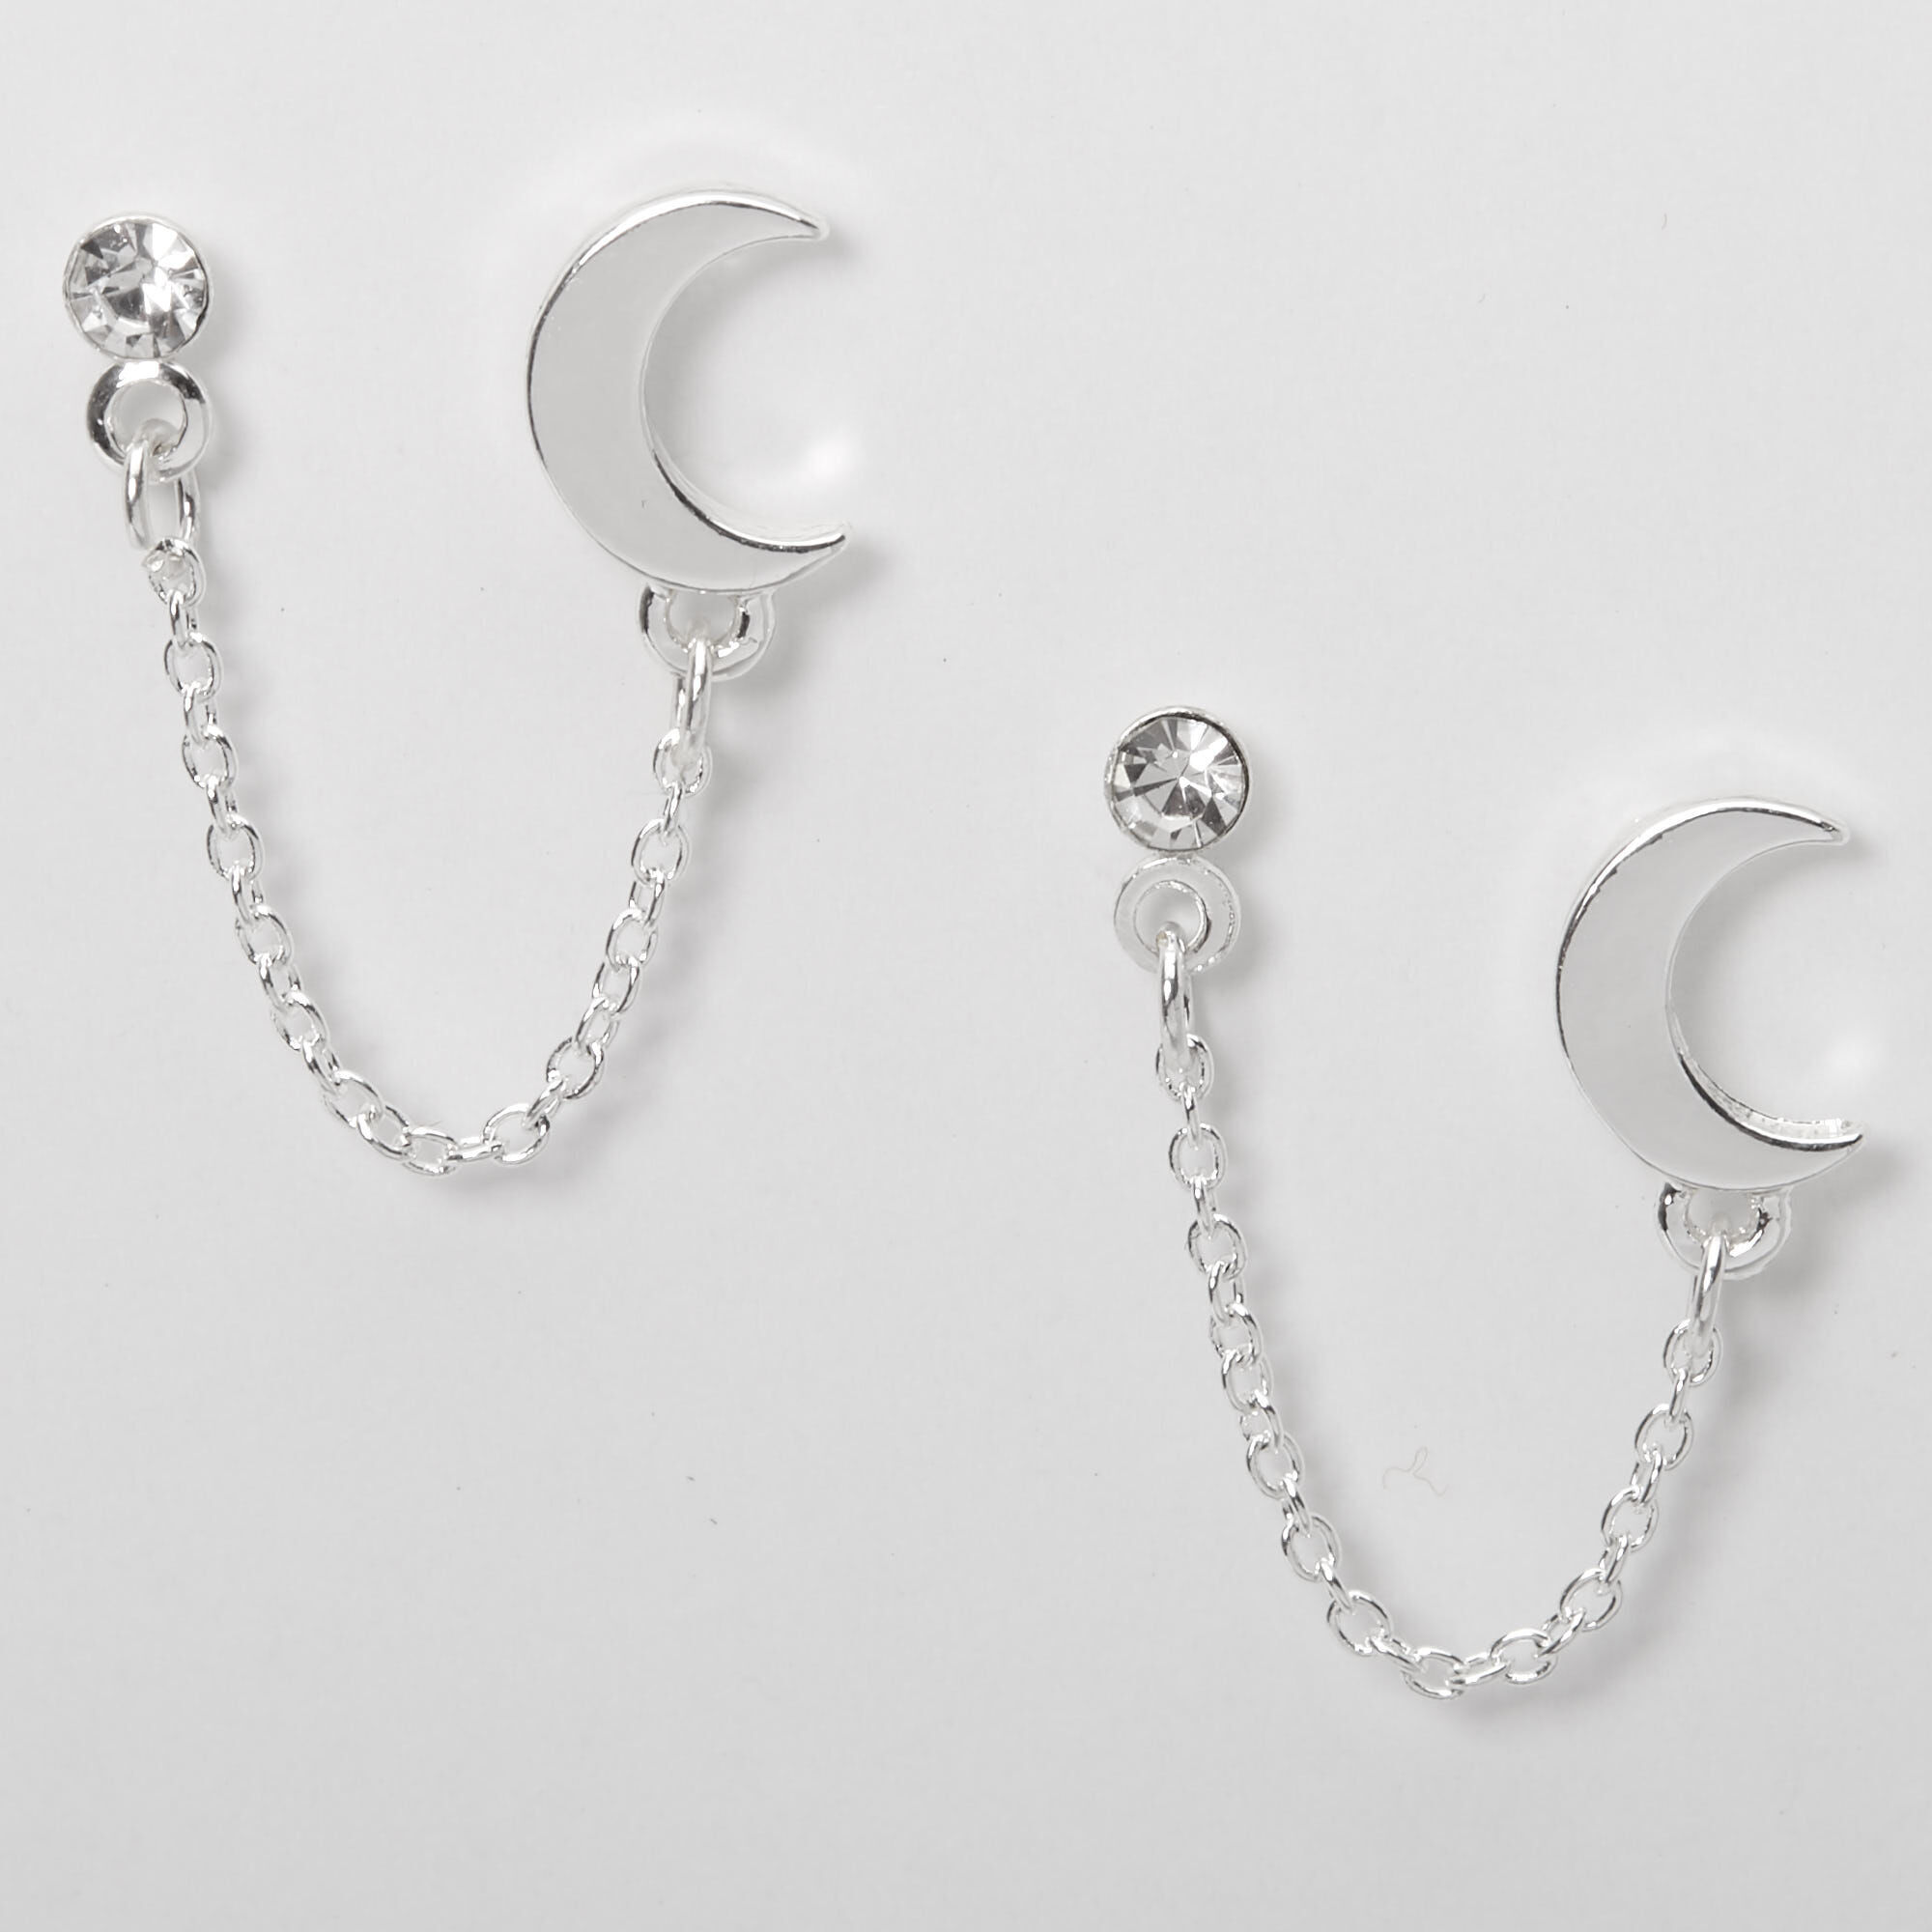 View Claires Tone Embellished Moon Connector Chain Stud Earrings Silver information